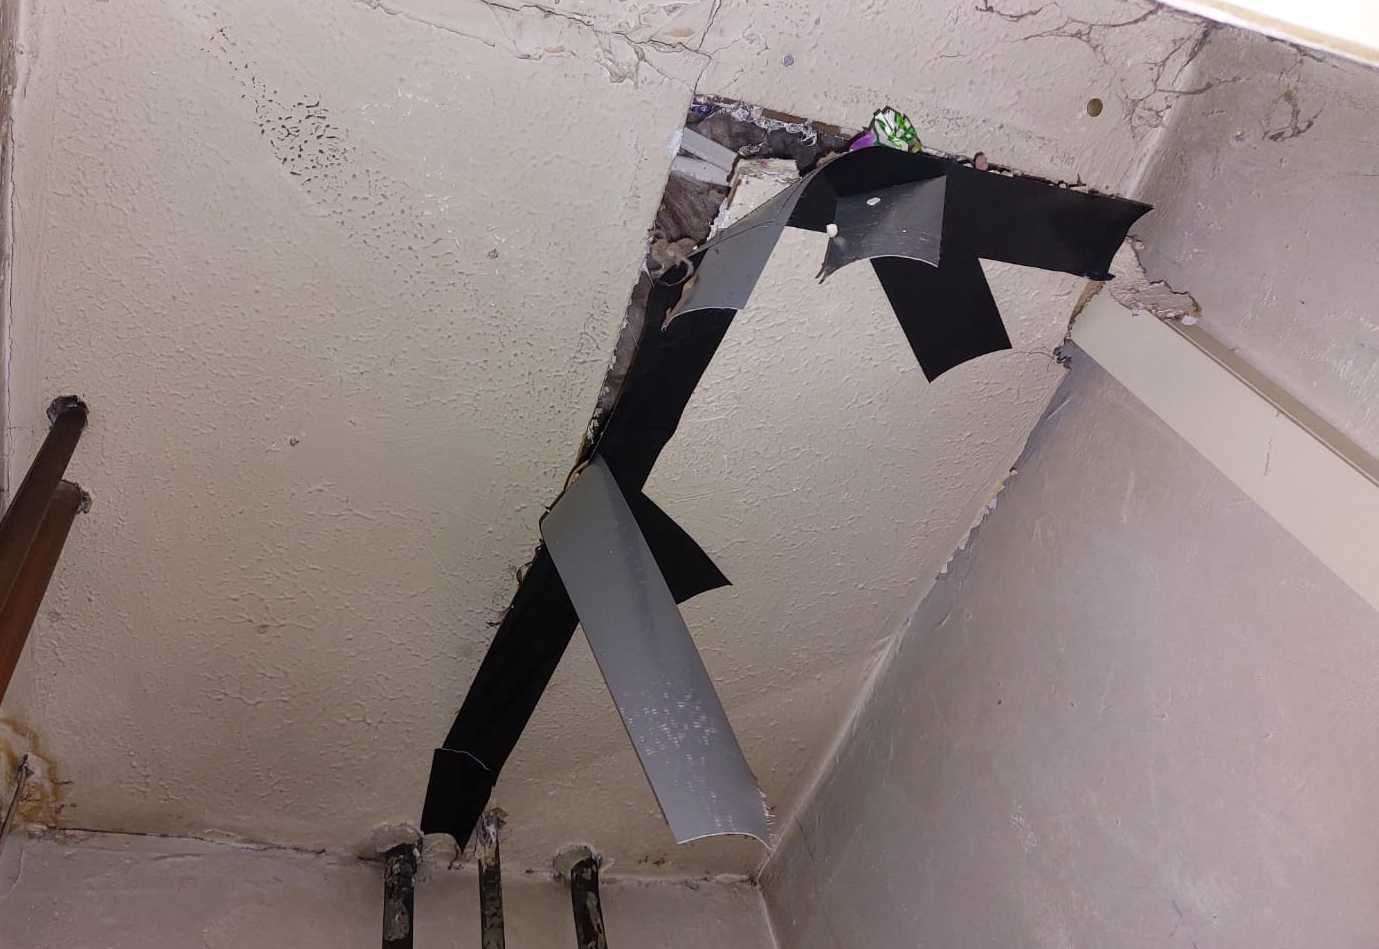 A hole in the ceiling of the airing cupboard, attempted to be taped up. Picture: Luke Hutson